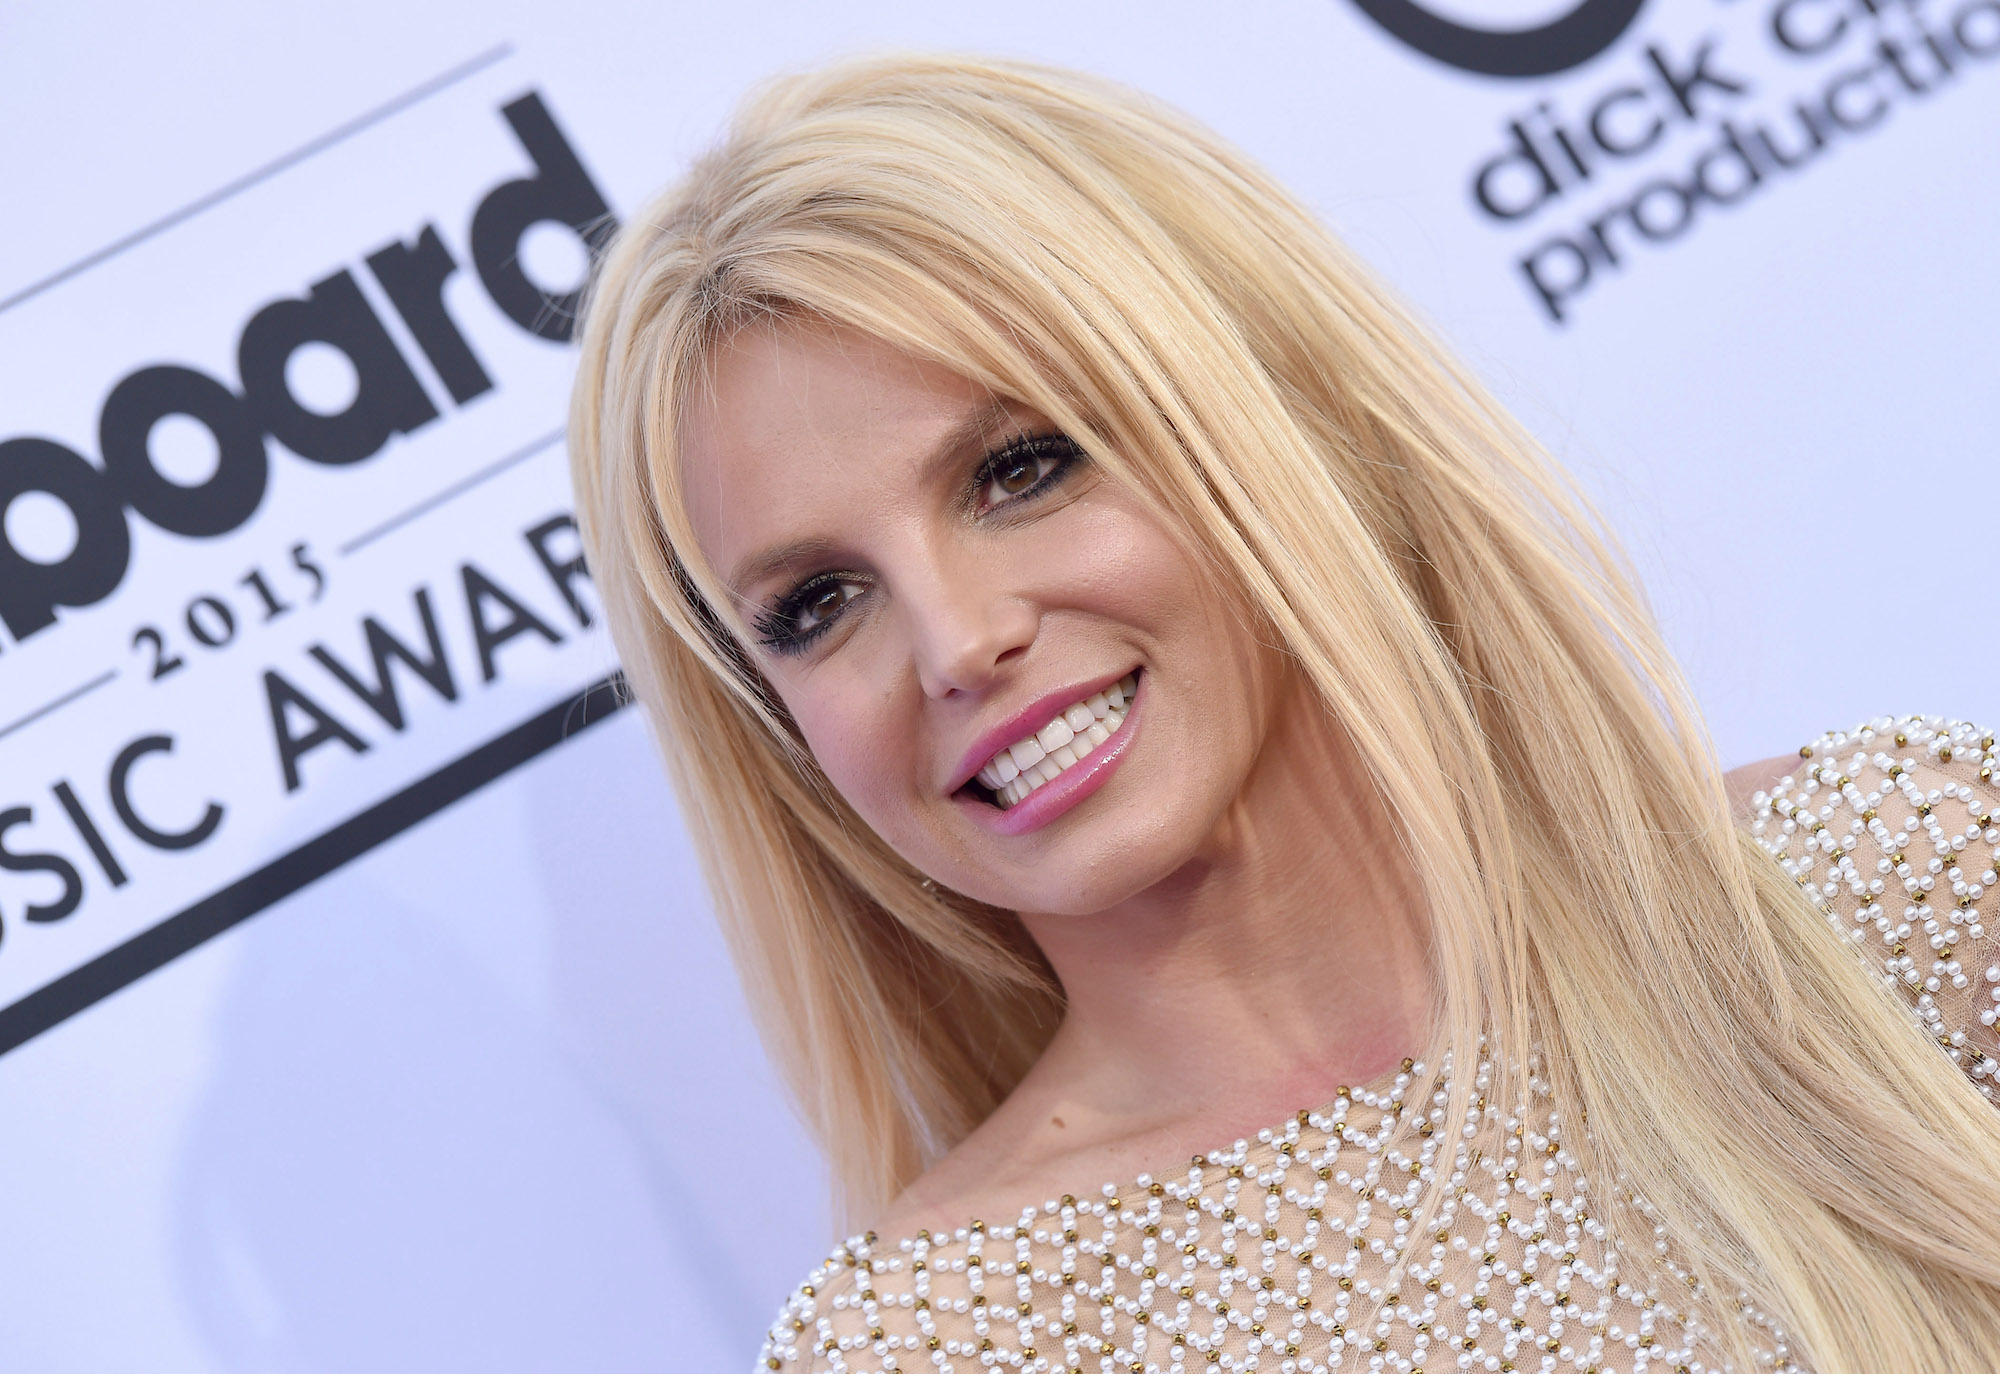 Britney Spears at the 2015 Billboard Music Awards